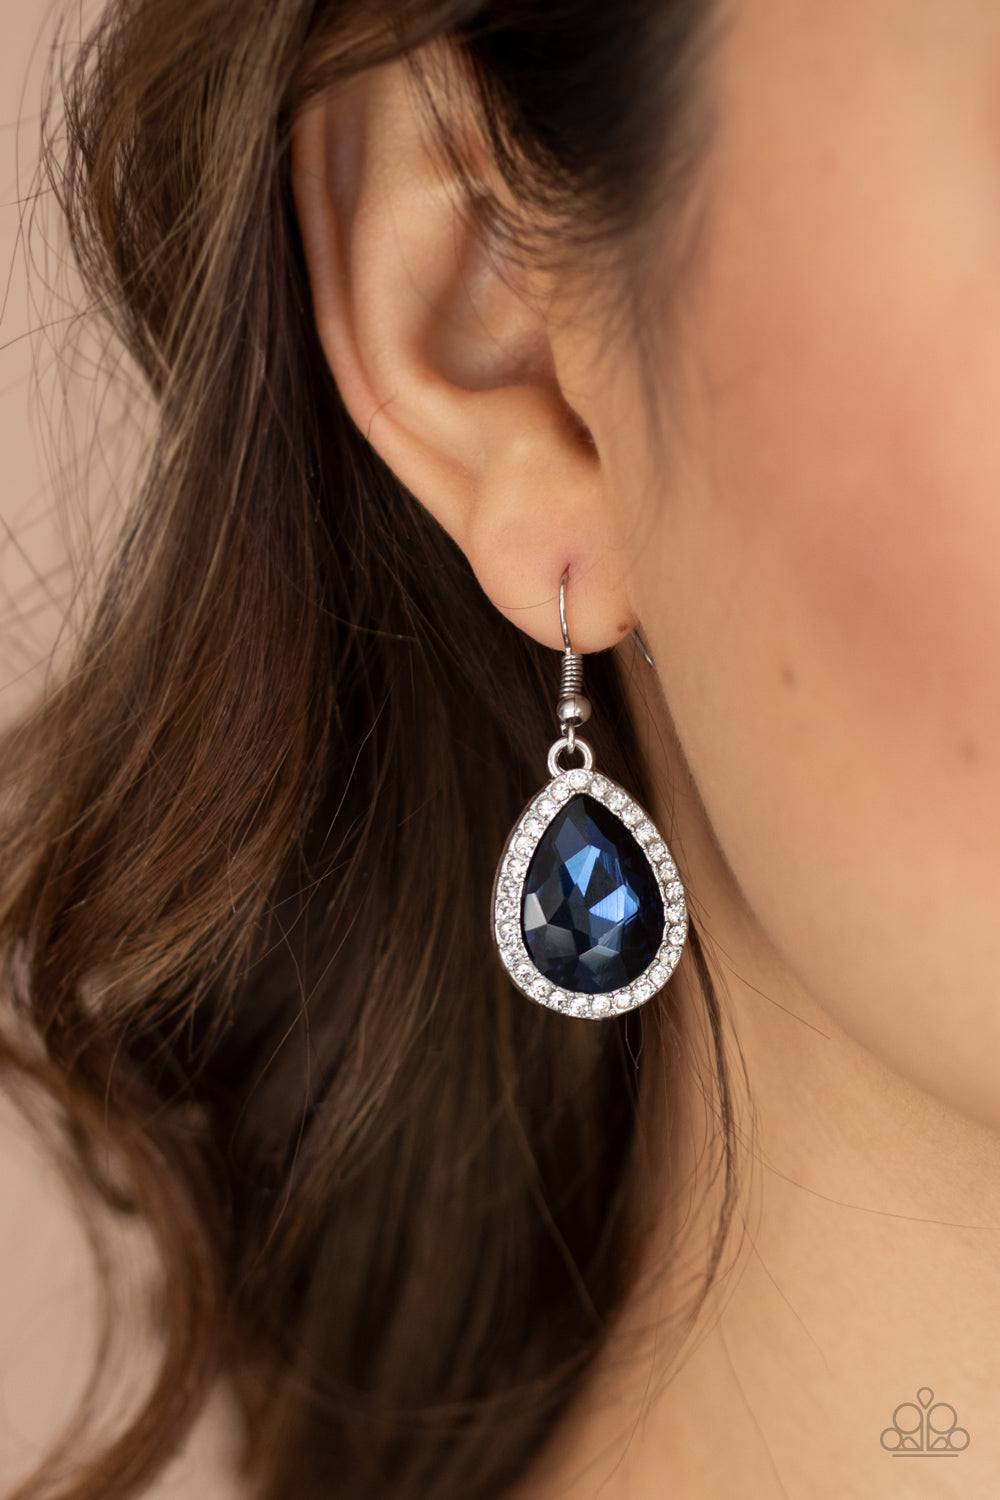 Dripping With Drama - Blue Earrings - Princess Glam Shop